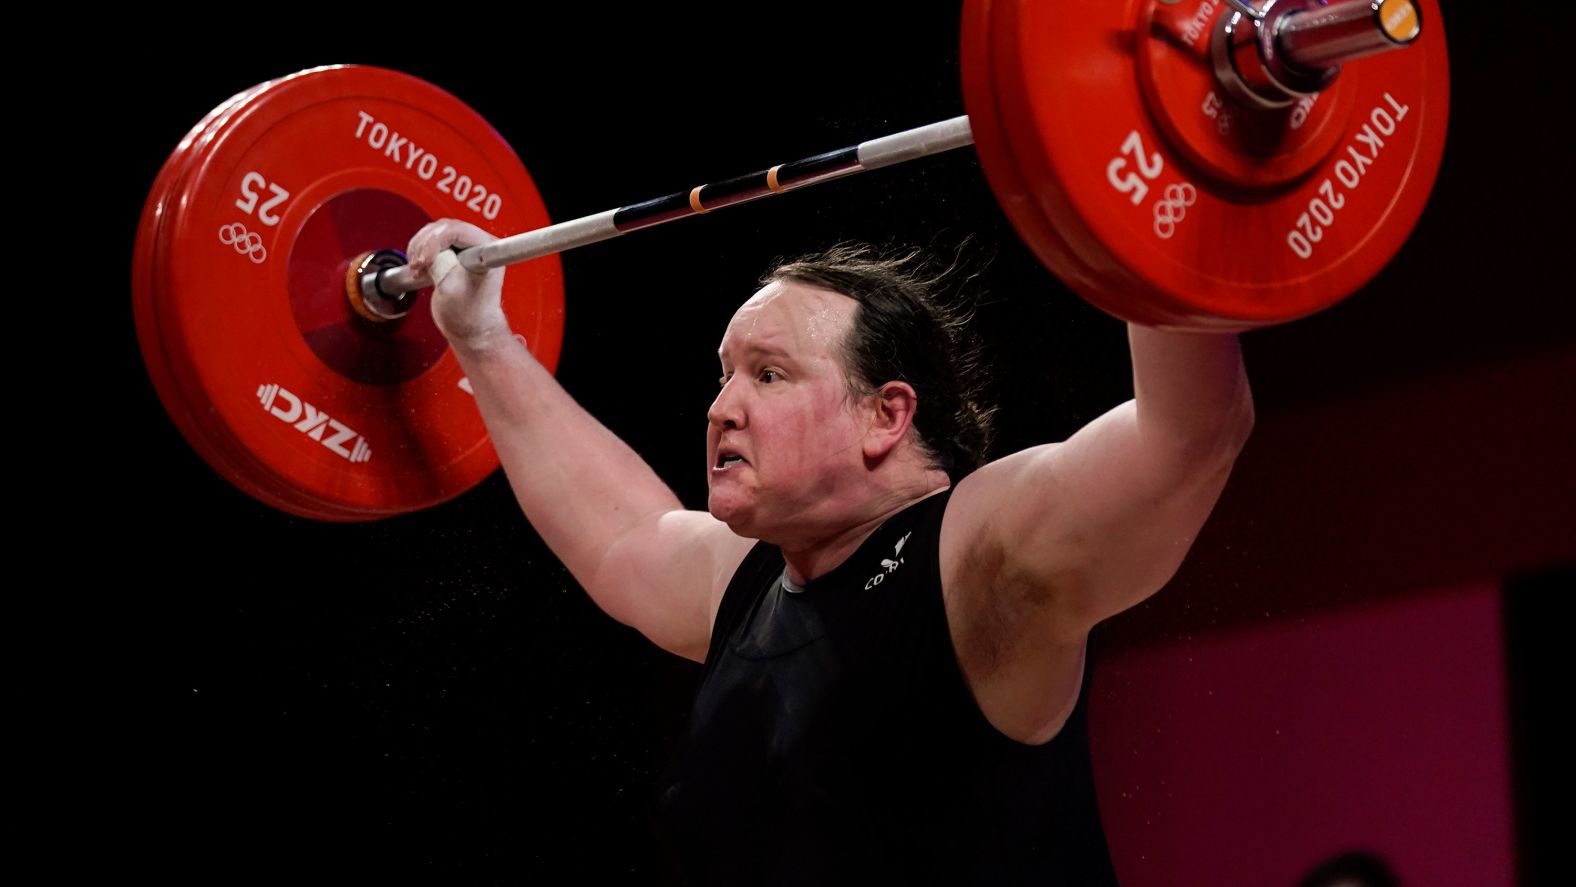 New Zealand's Laurel Hubbard competes in weightlifting on Monday, August 2. She <a href="index.php?page=&url=https%3A%2F%2Fwww.cnn.com%2Fworld%2Flive-news%2Ftokyo-2020-olympics-08-02-21-spt%2Fh_80658388c8d42fe99194a6687e9a0307" target="_blank">is the first openly transgender woman to compete</a> in the 125-year history of the Olympics.